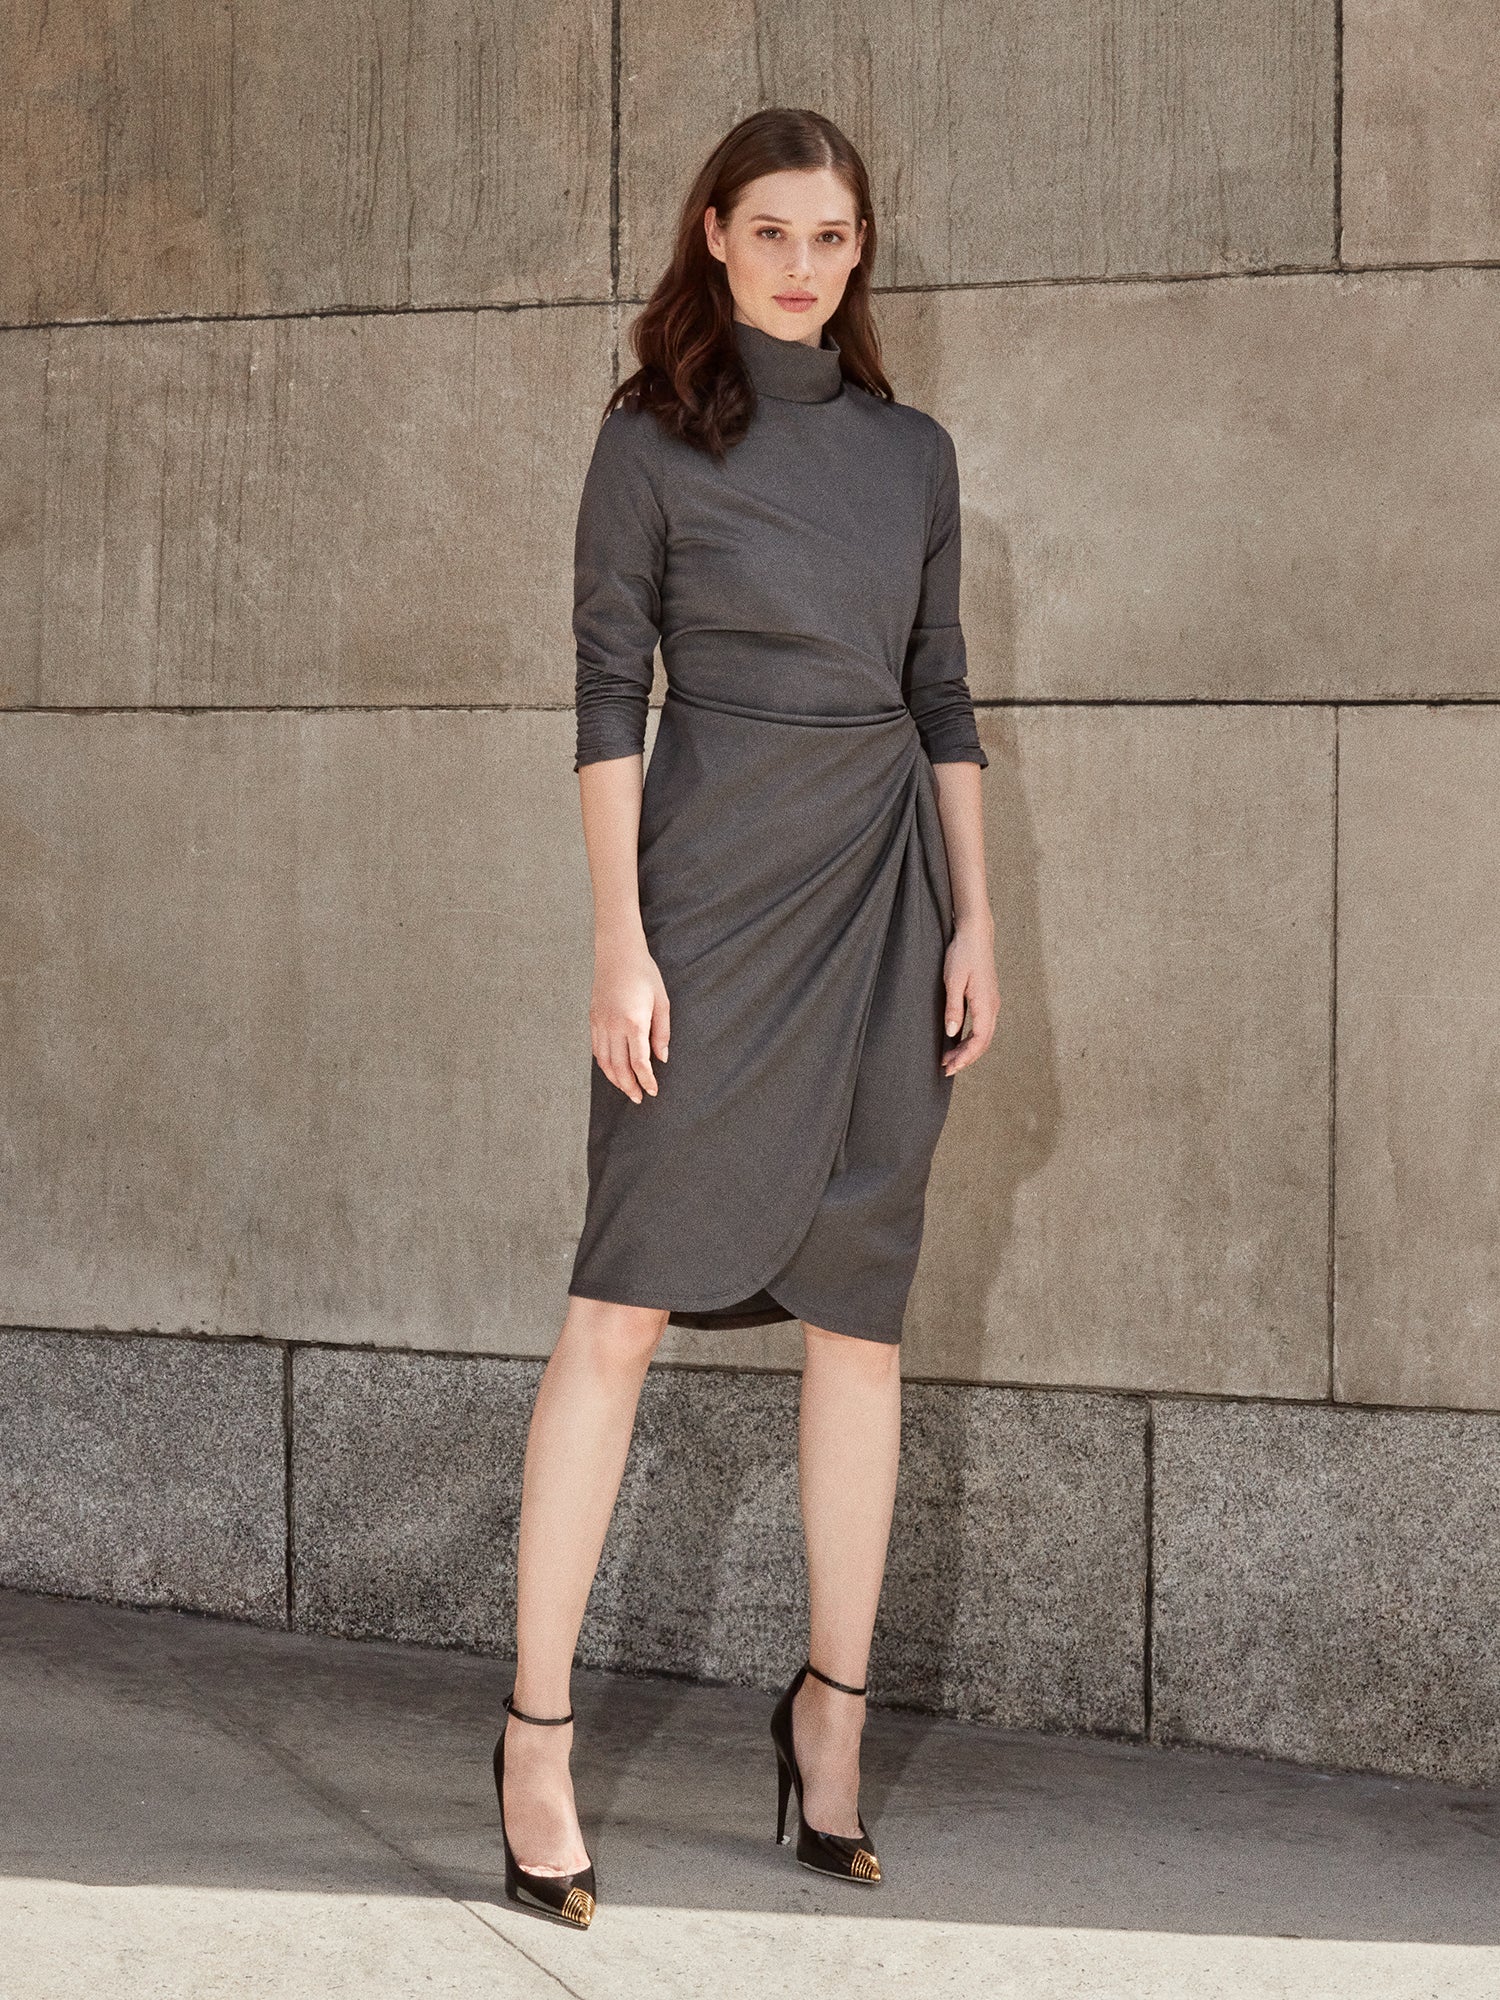 warehouse knot front ponte dress